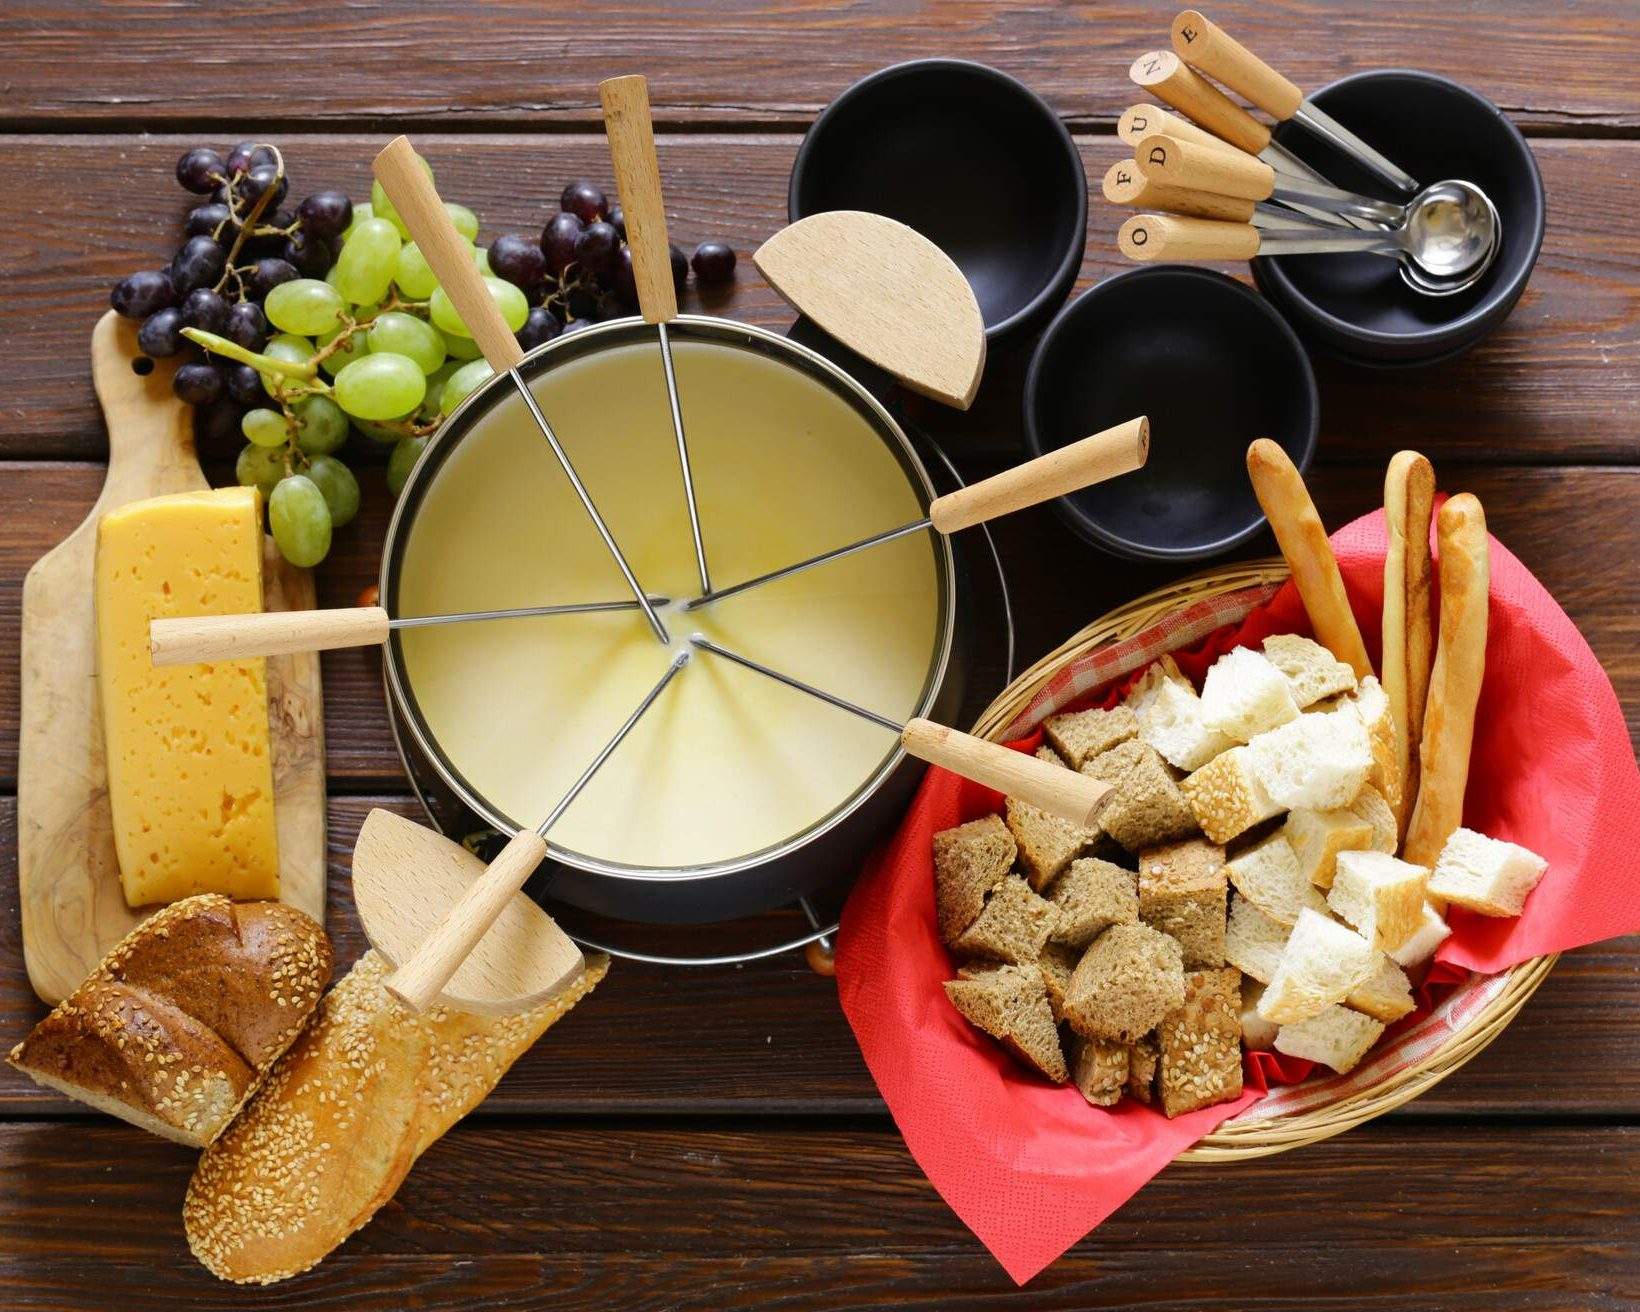 Traditional set of utensils for fondue, with bread, cheese, grapes